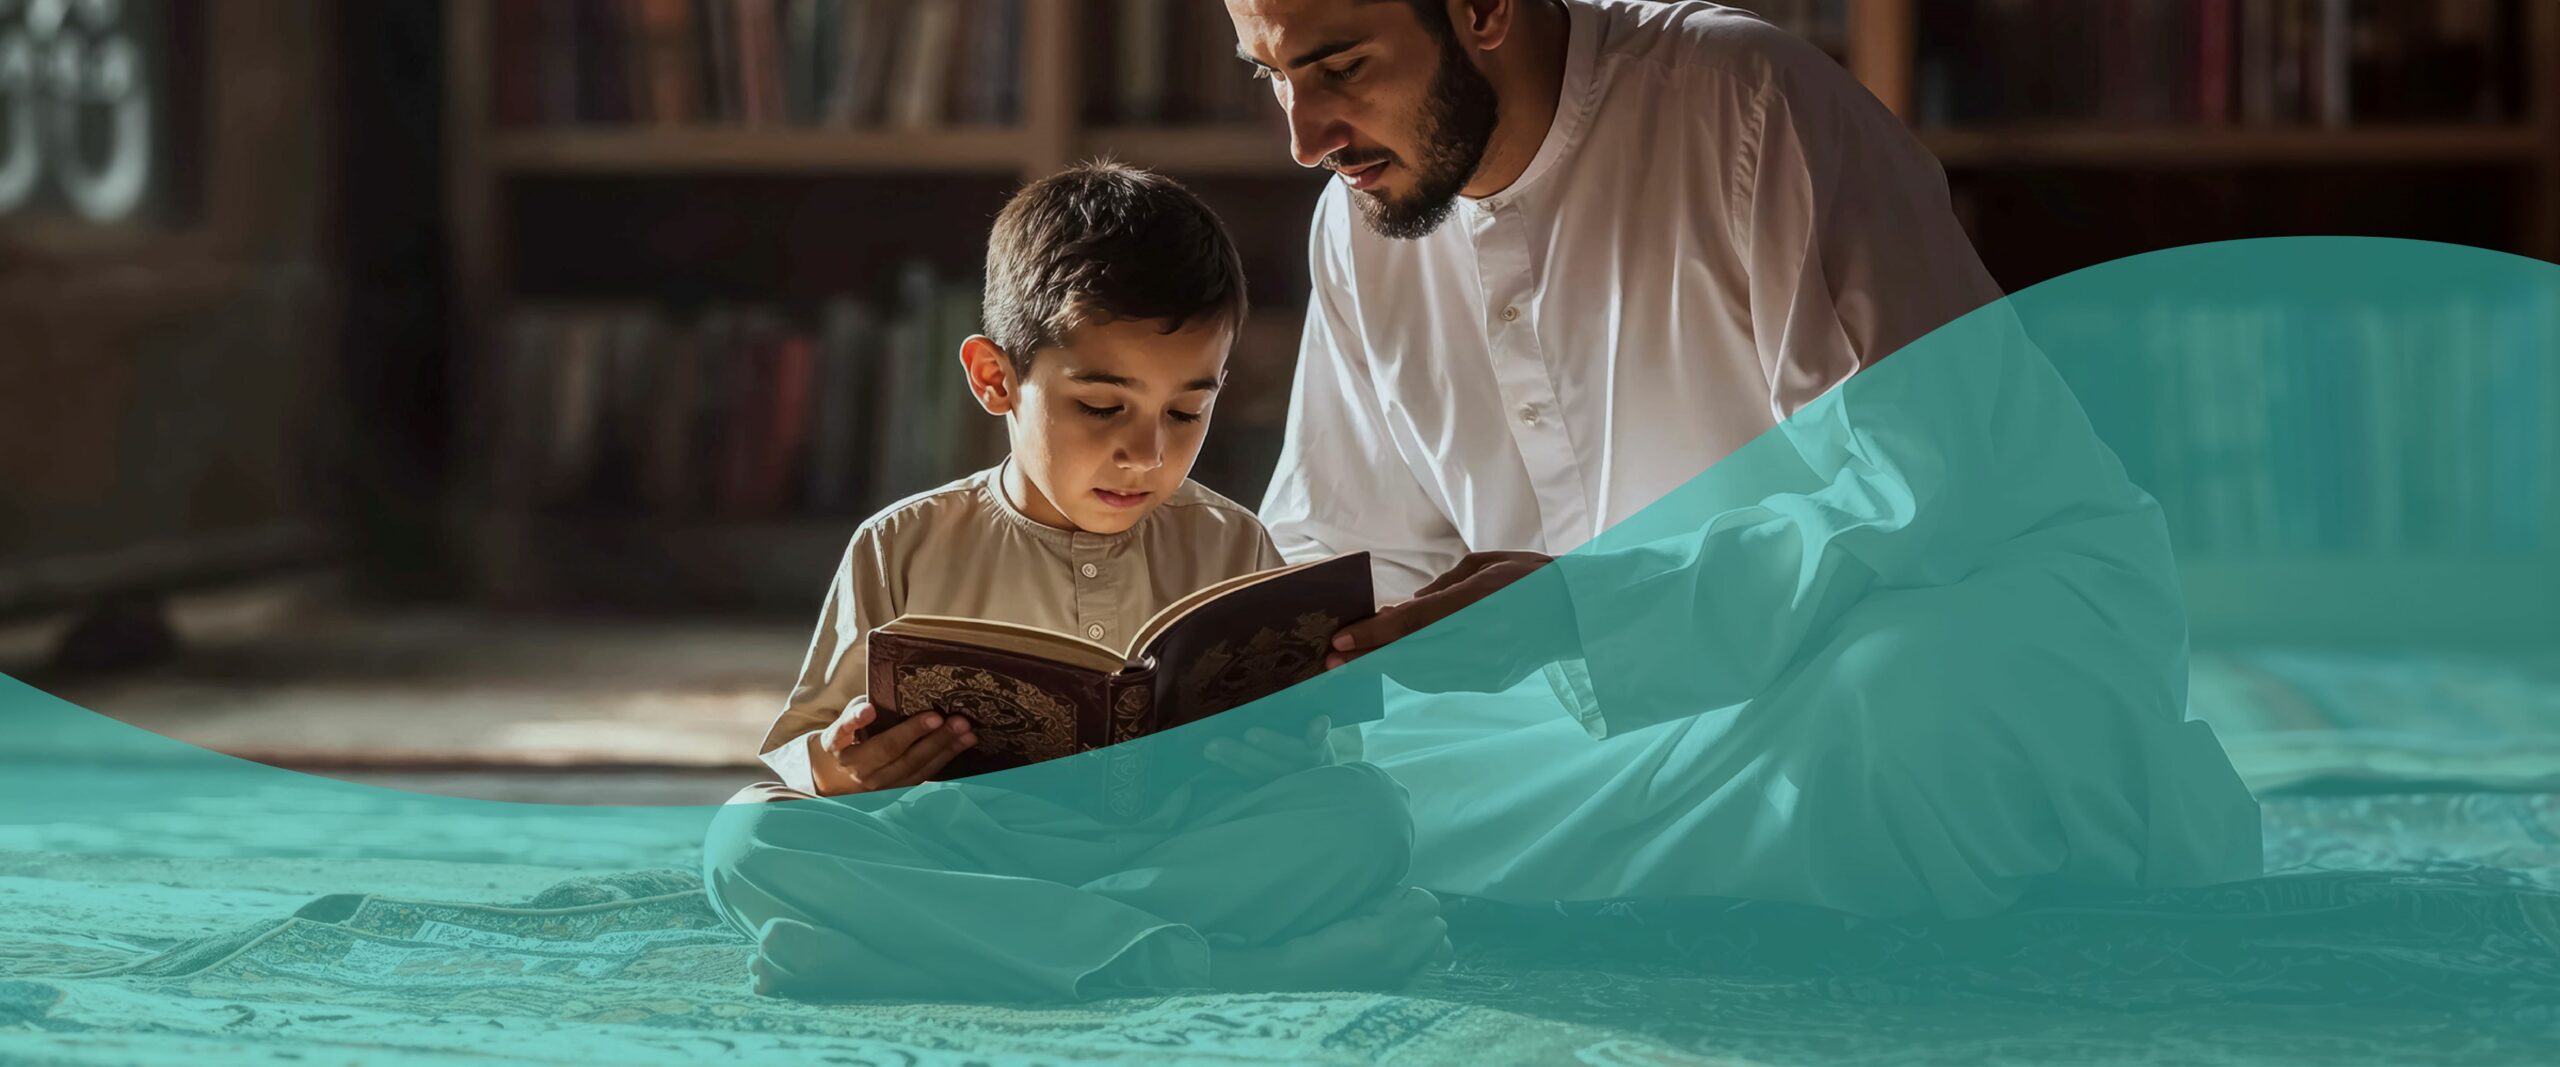 Ramadan for Kids - Educating Our Children on the Quran